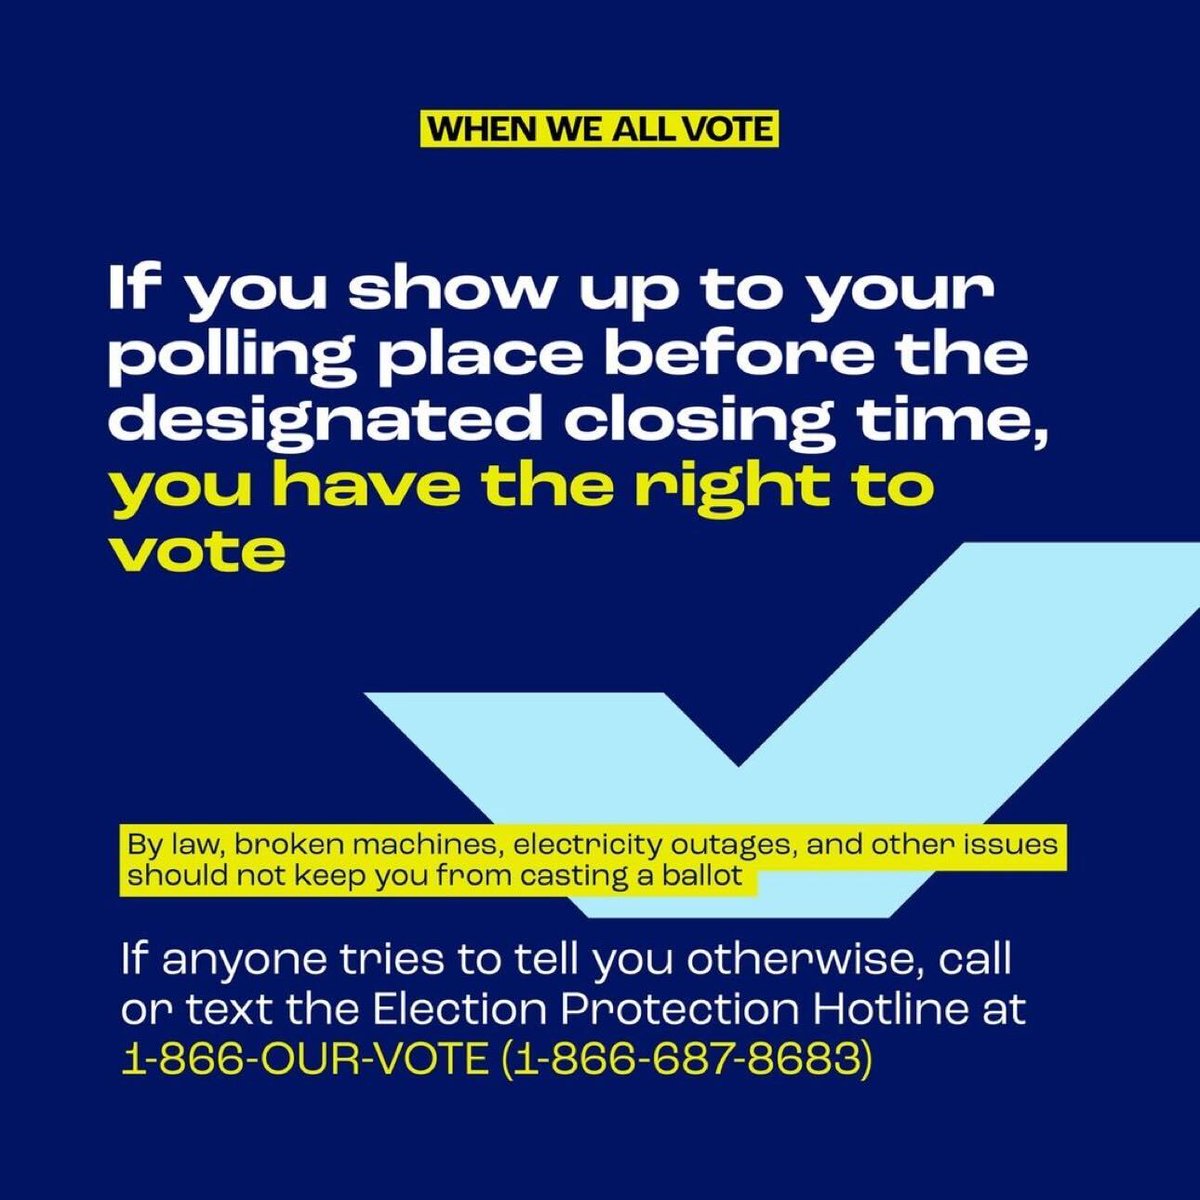 Hey #Virginia! If you're in line at your designated polling place when the polls close, you have the right to vote.  STAY 👏 IN 👏 THAT 👏 LINE 👏 If you're being pressured to leave the line, call or text the Election Protection Hotline ASAP at 1-866-OUR-VOTE (1-866-687-8683).